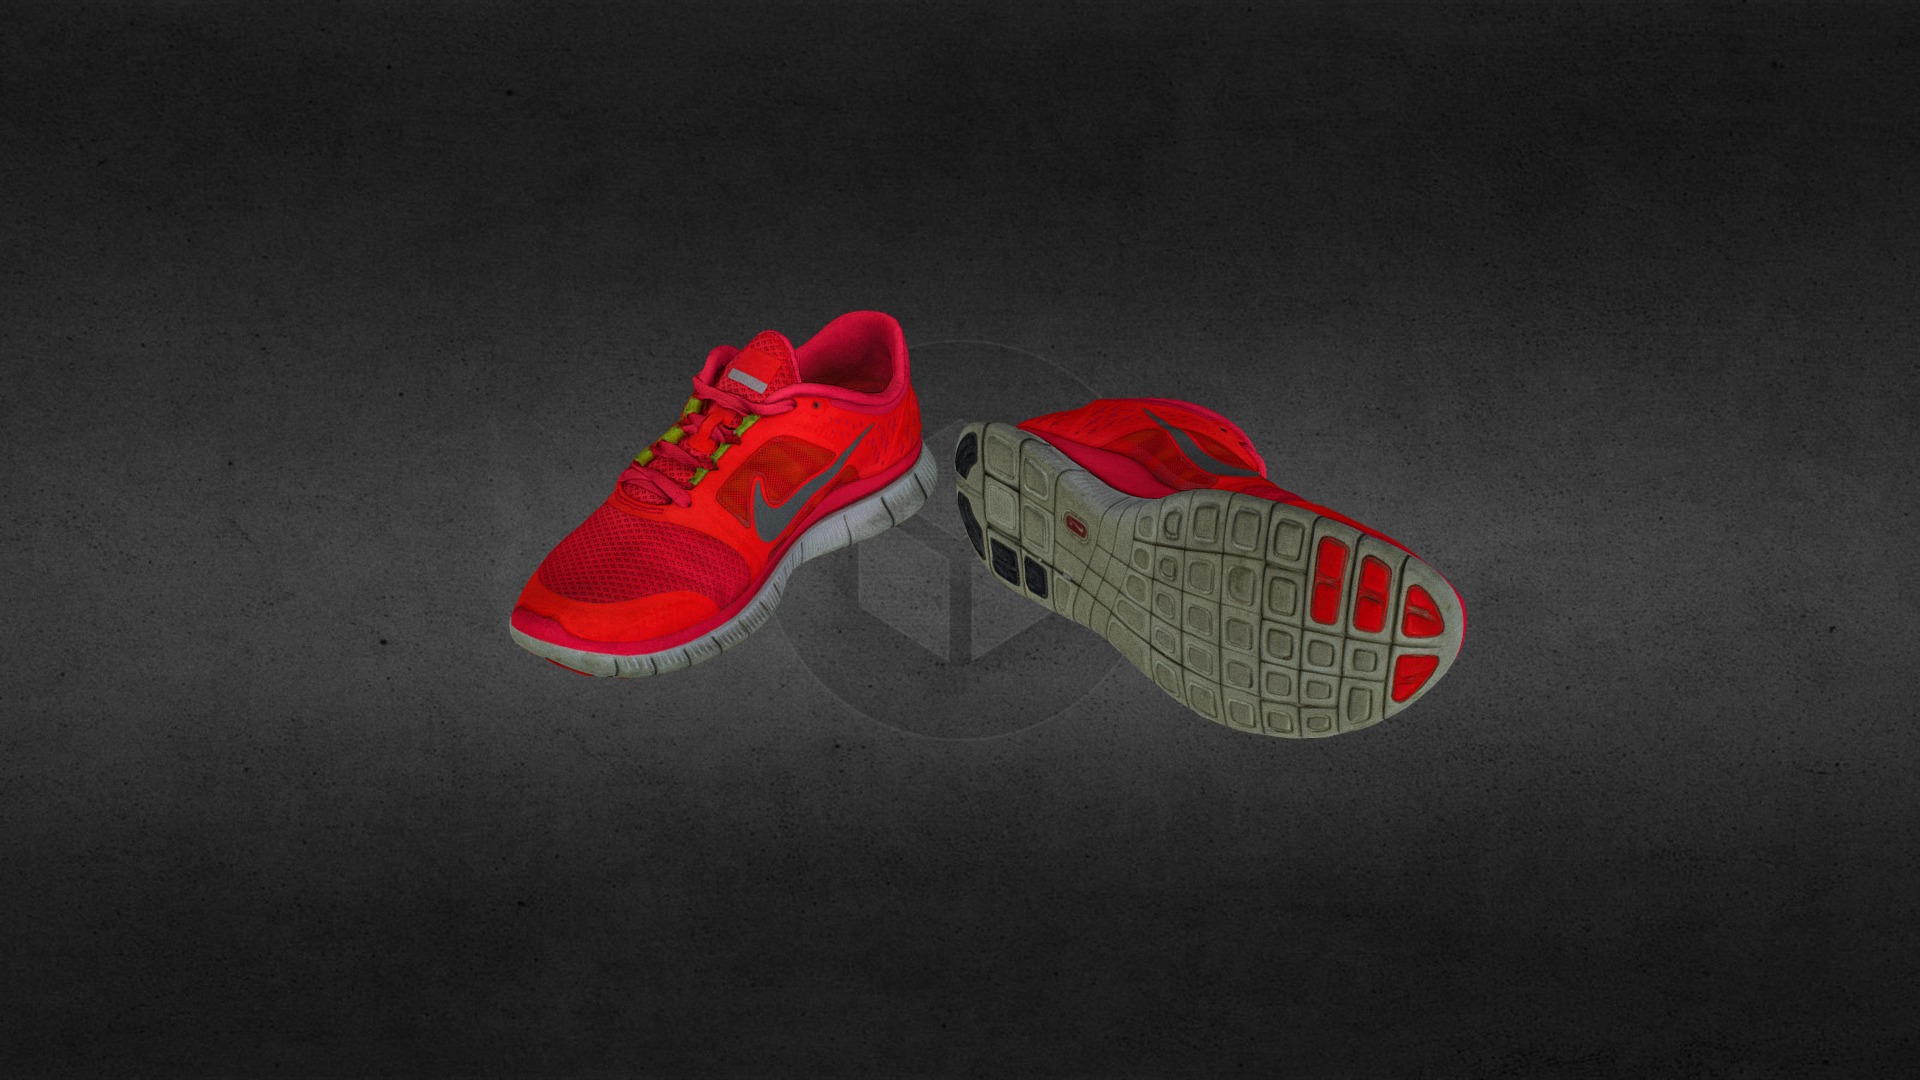 3D model Nike shoes - This is a 3D model of the Nike shoes. The 3D model is about a pair of shoes on a black surface.